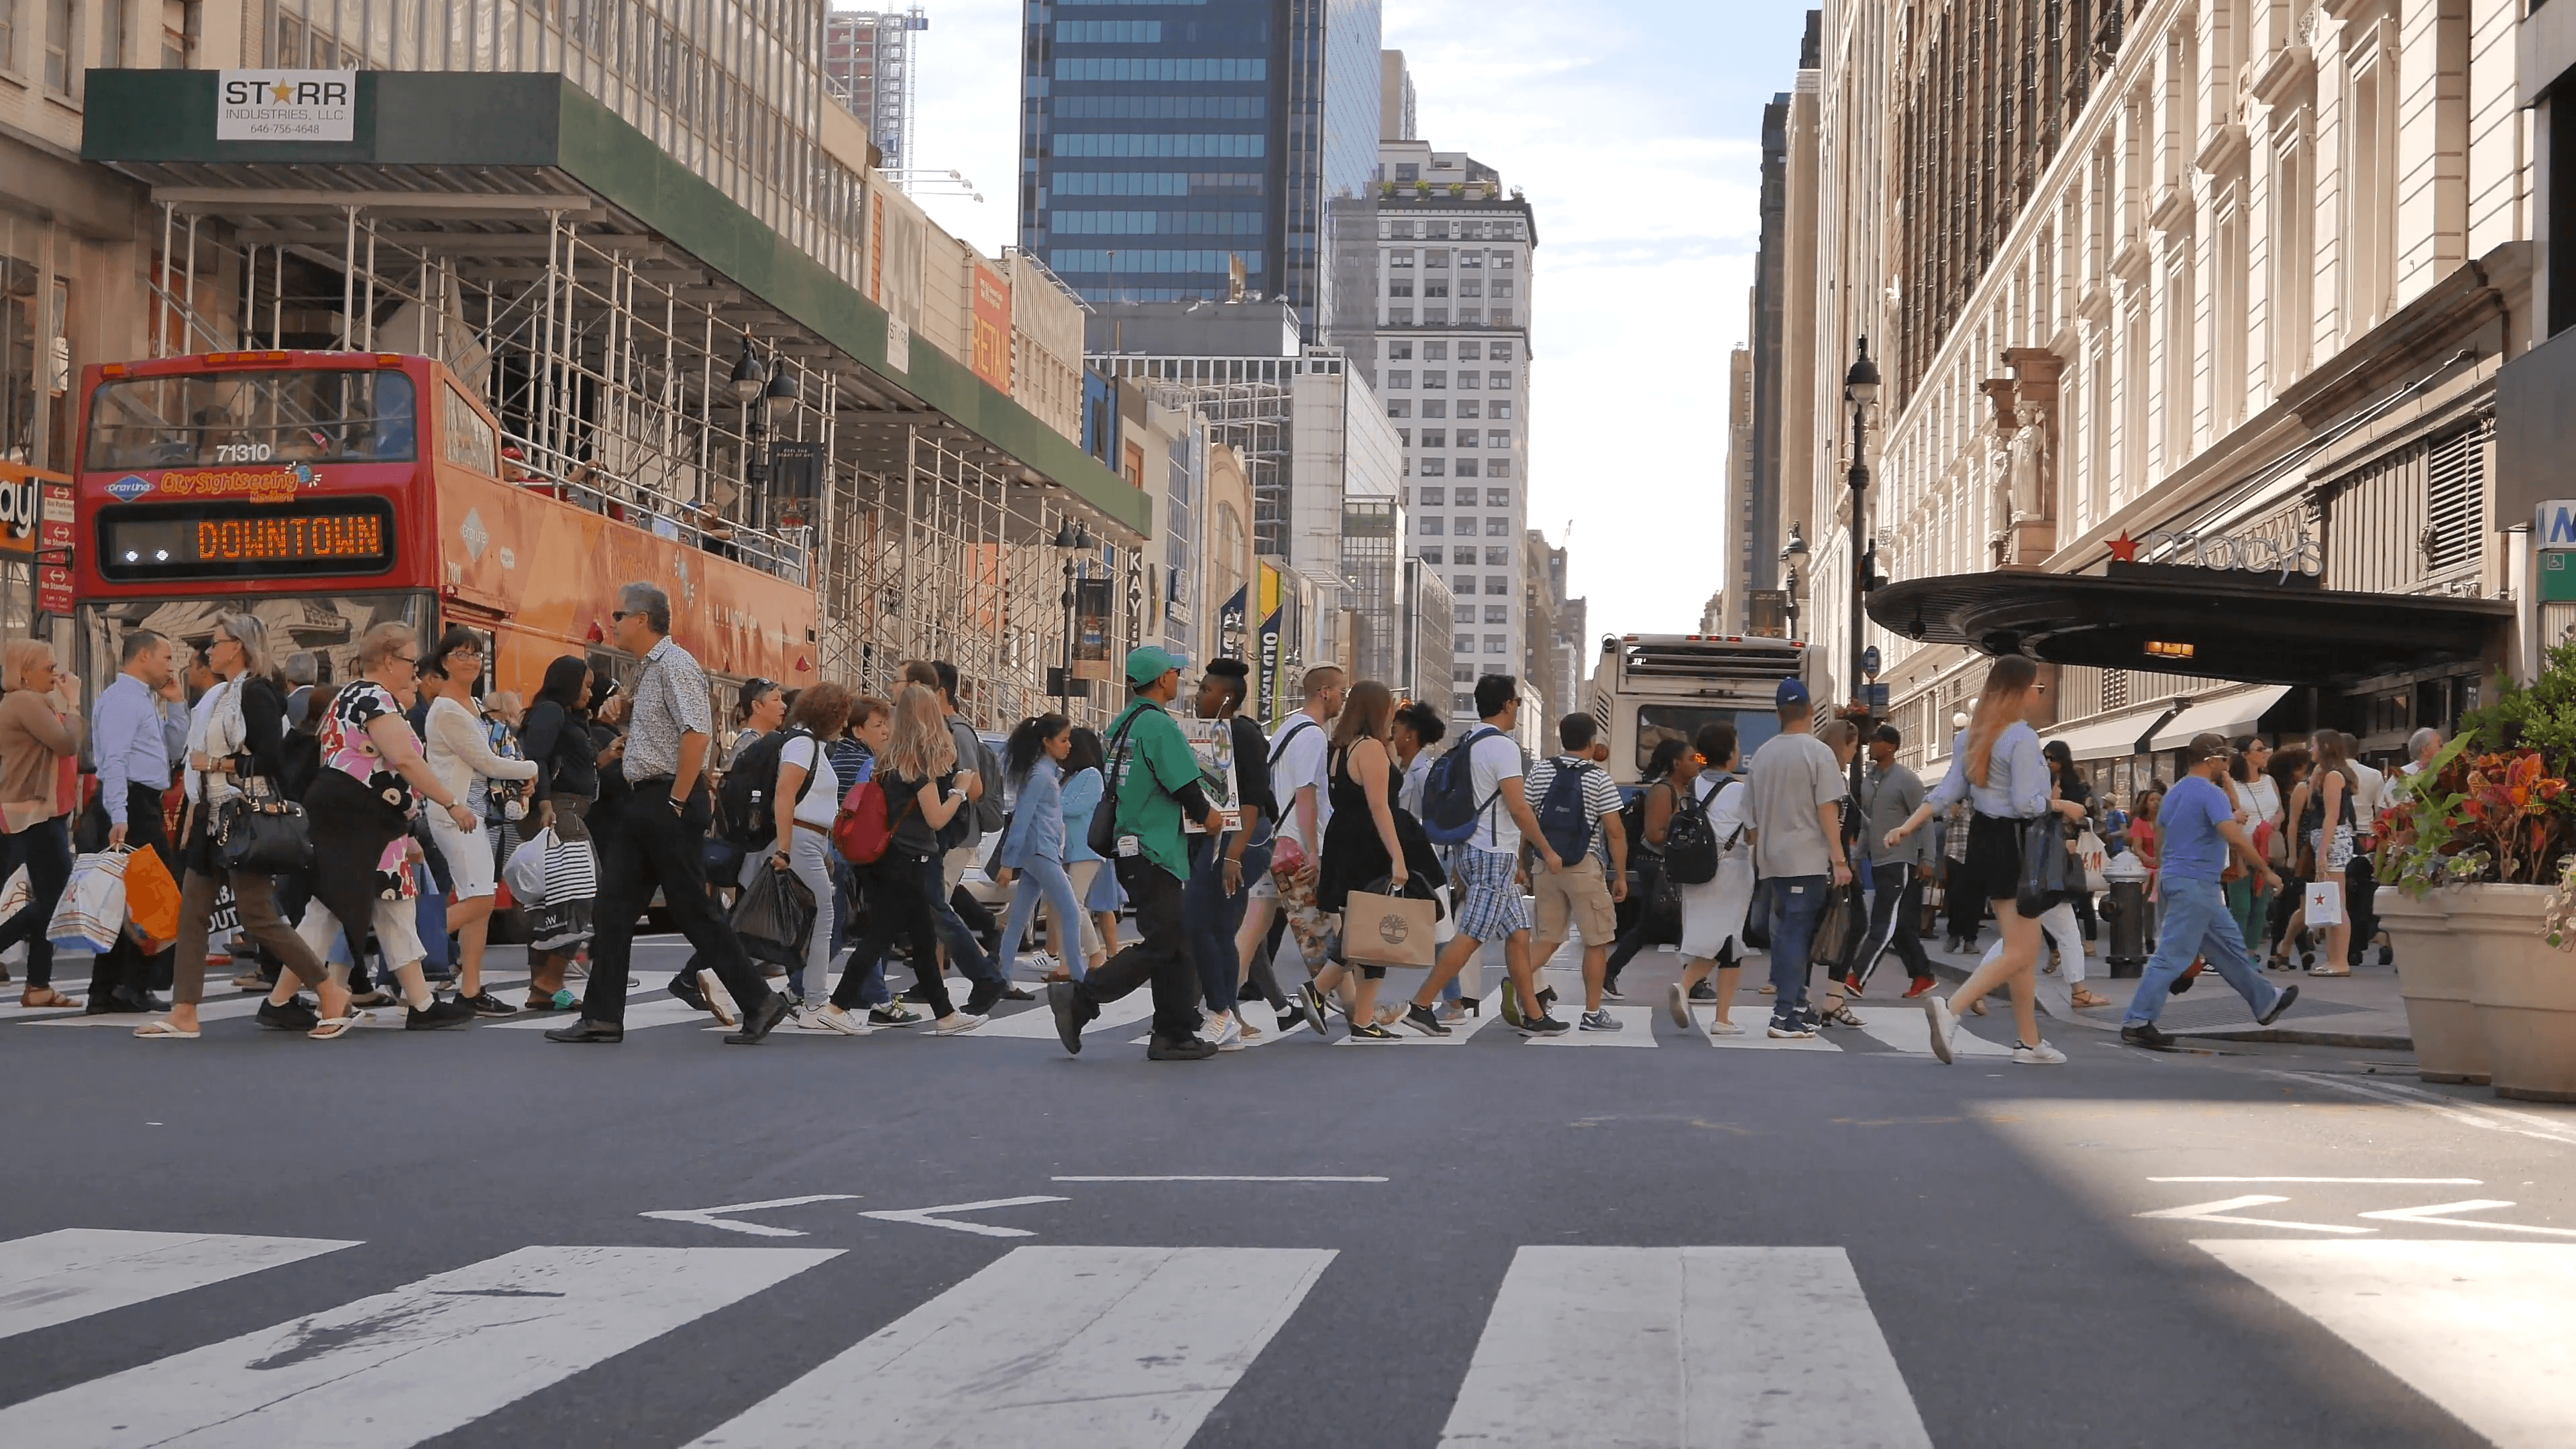 crowded city street in new york. people walking background Stock